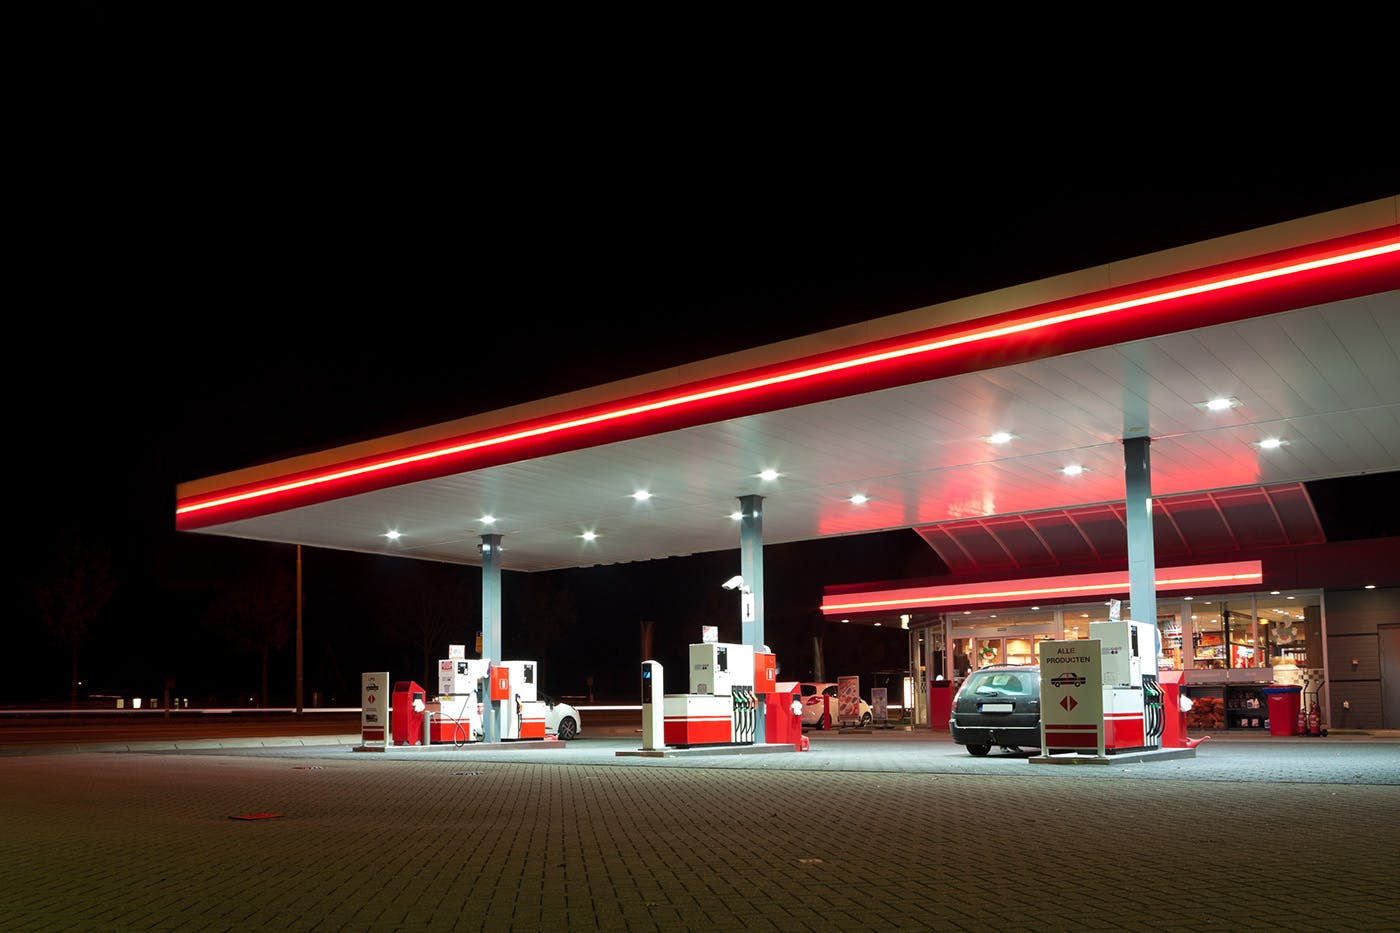 Gas station with lights on at night